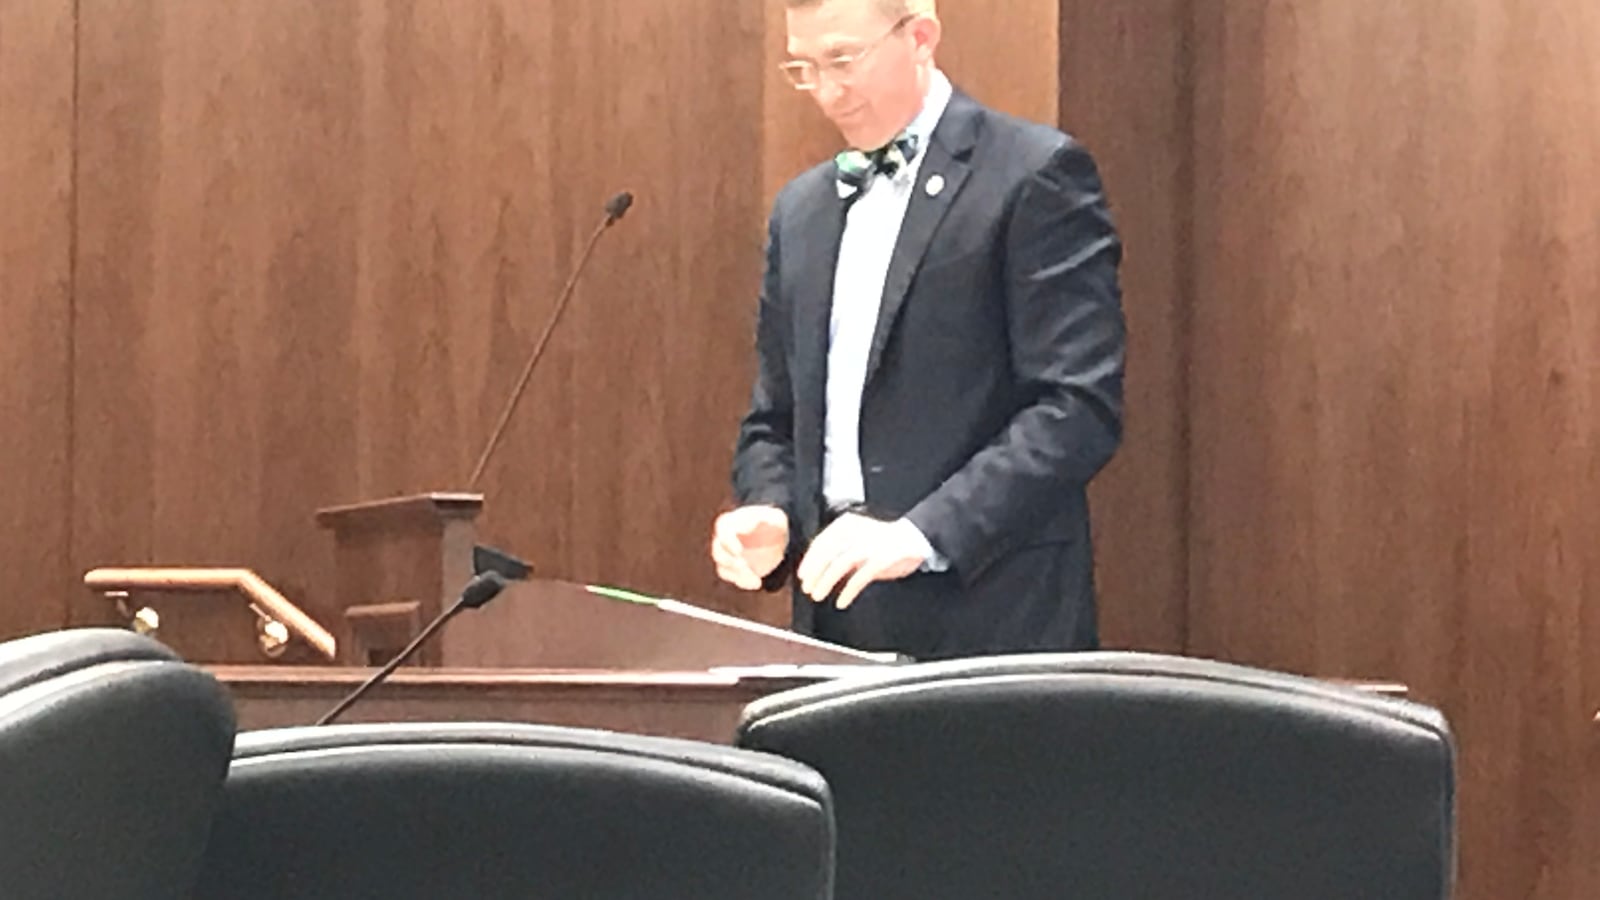 Rep. Ryan Williams presents a bill on April 4 to allow Tennessee teachers to carry a concealed weapon. The Cookeville Republican has since pulled his proposal from consideration in the 2018 legislative session.